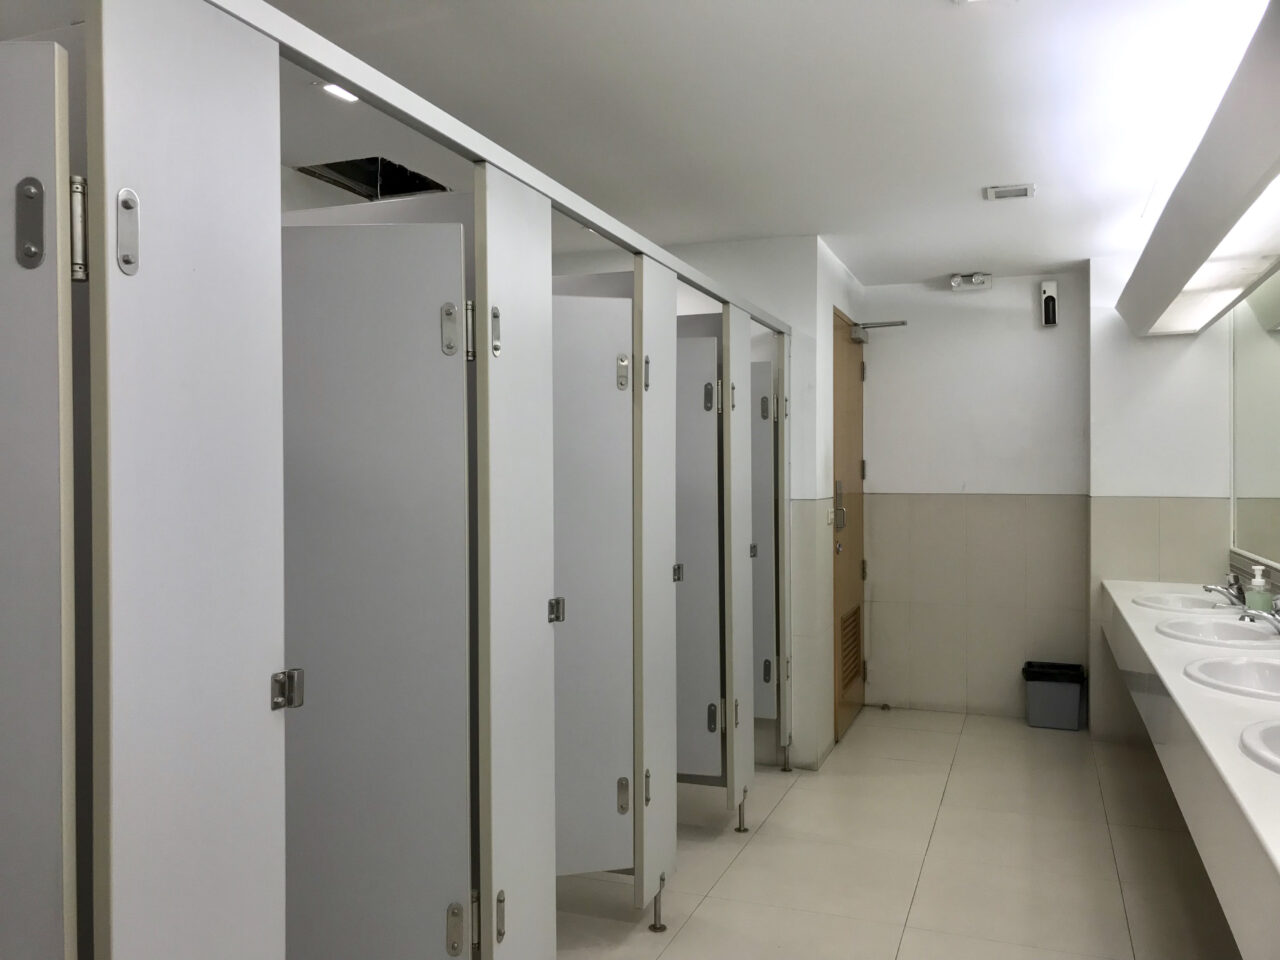 A public bathroom with the stalls open